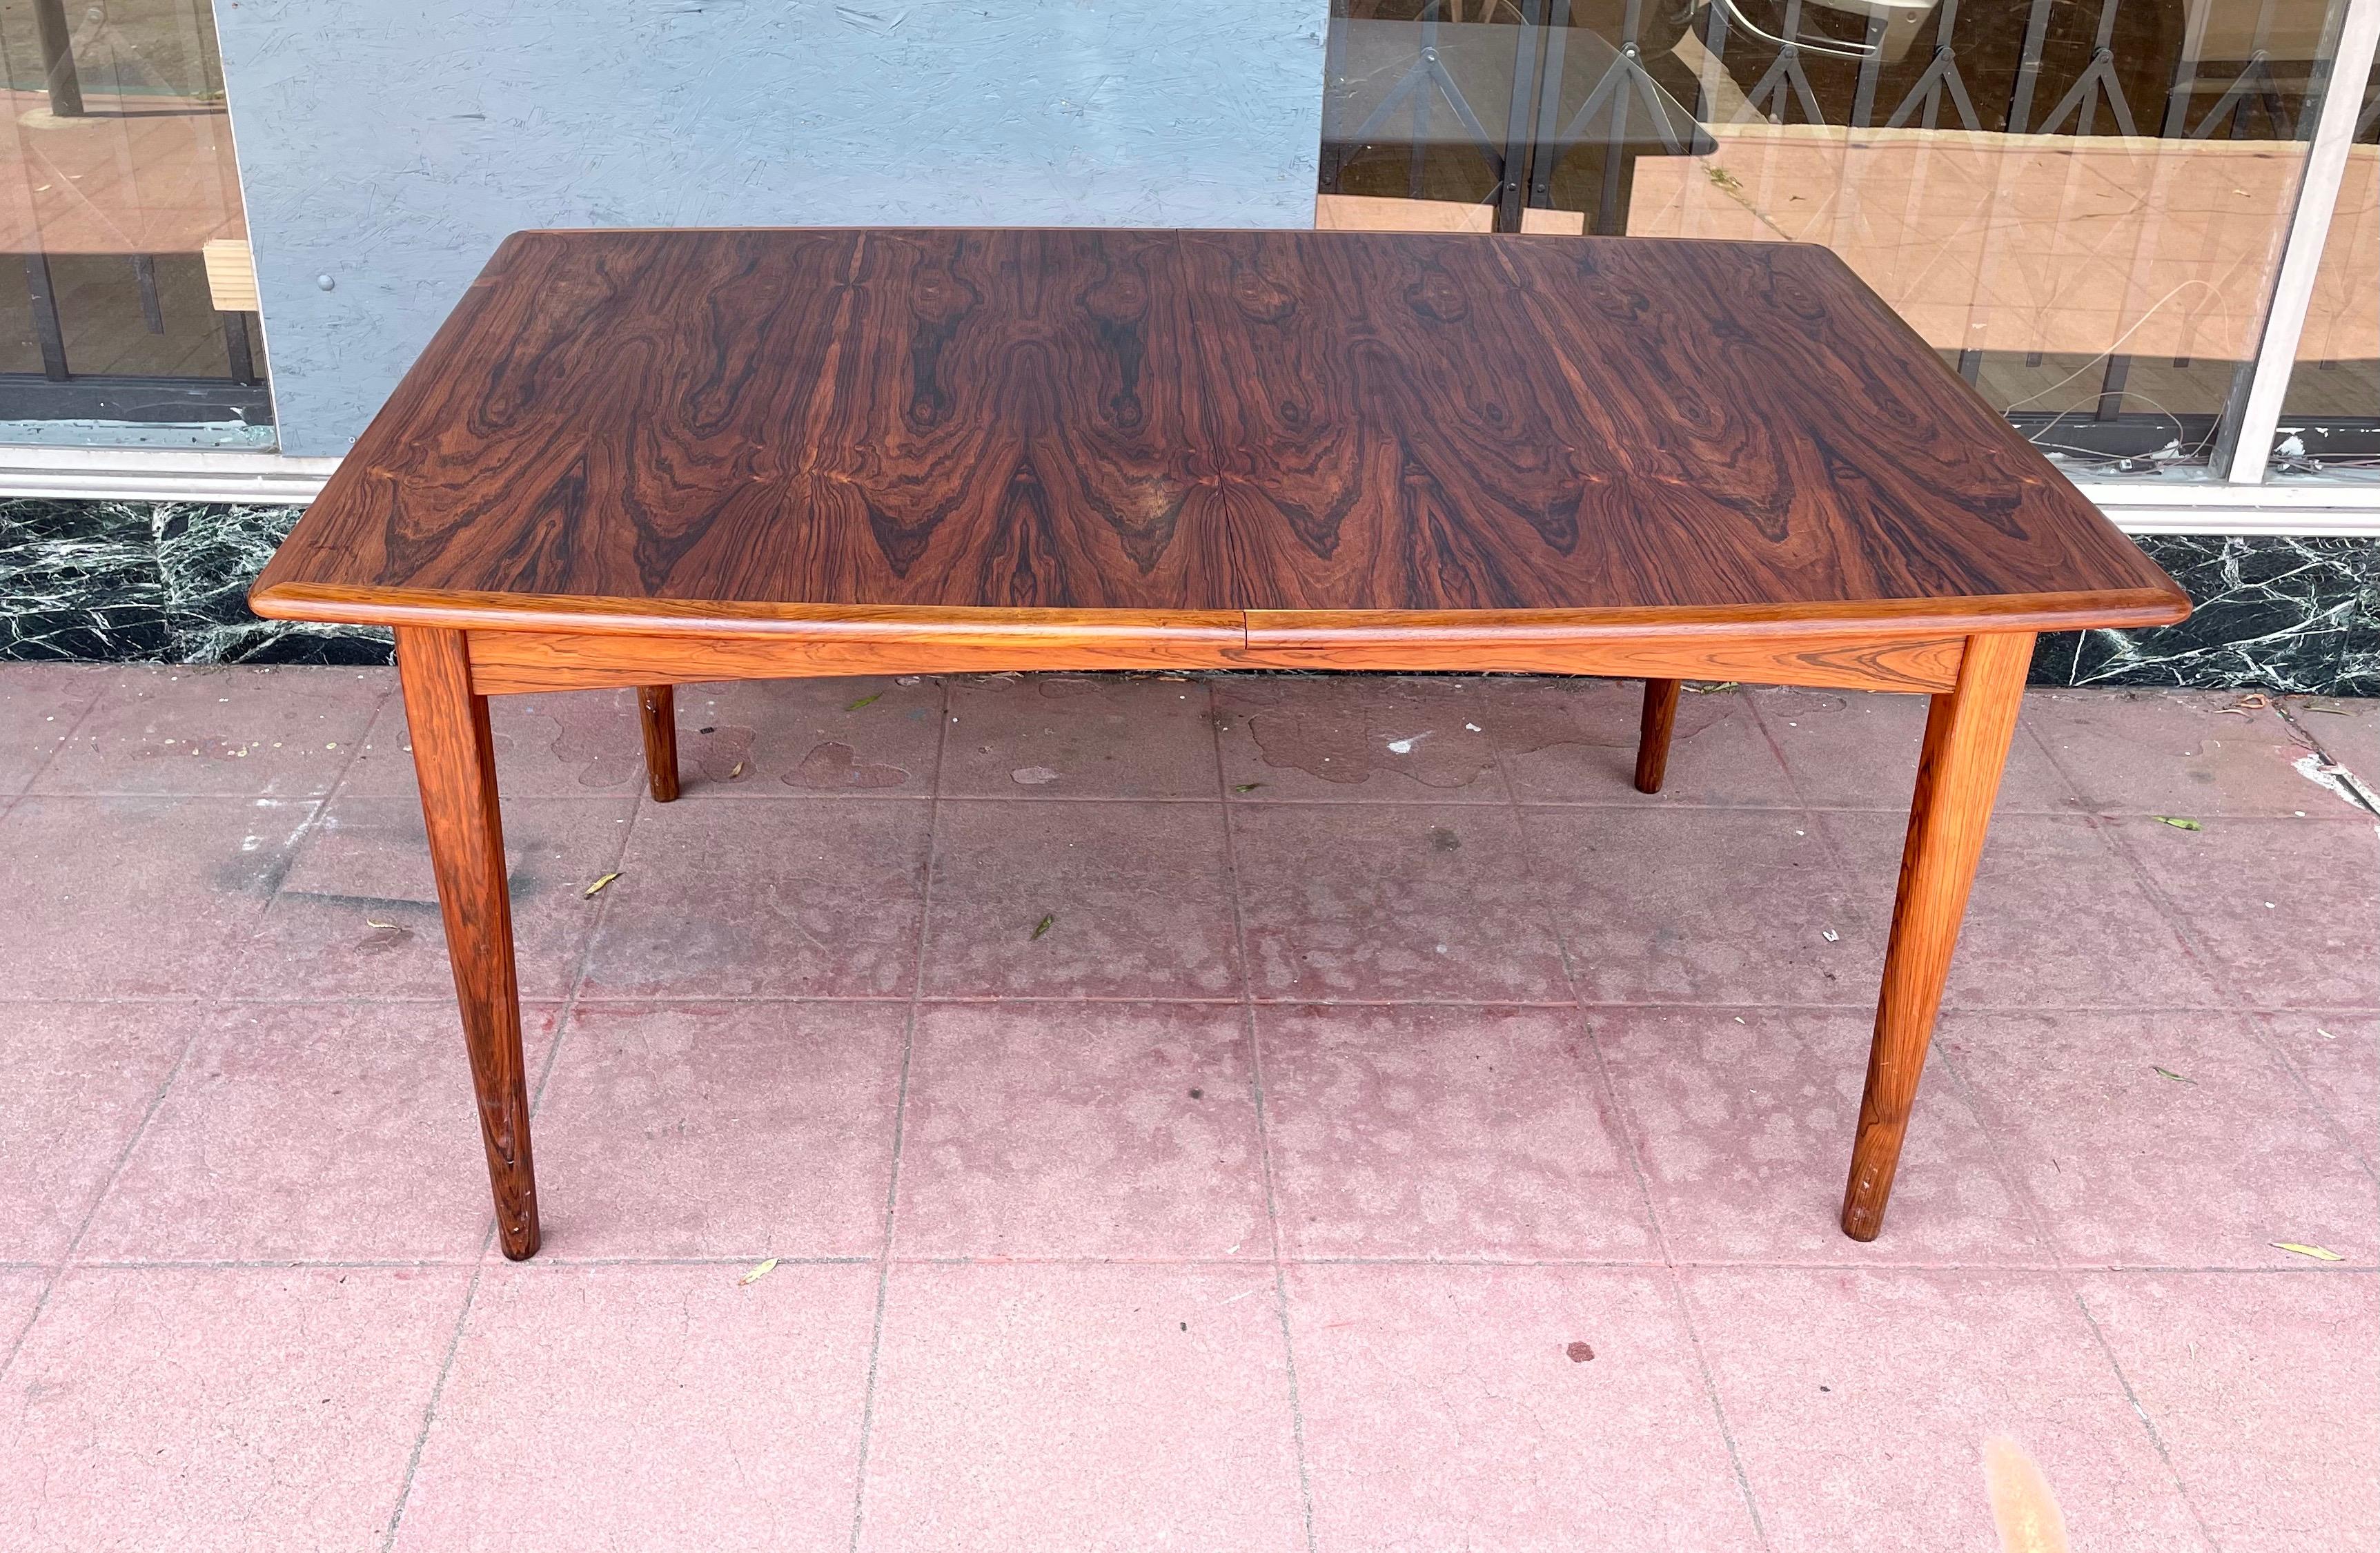 Beautiful X Large rosewood extendable dining table with butterfly leaves, Incredible system where each leaf hides under the table and folds, makes it easy for storage and only needs one person to adjust. solid and sturdy we have cleaned and oiled